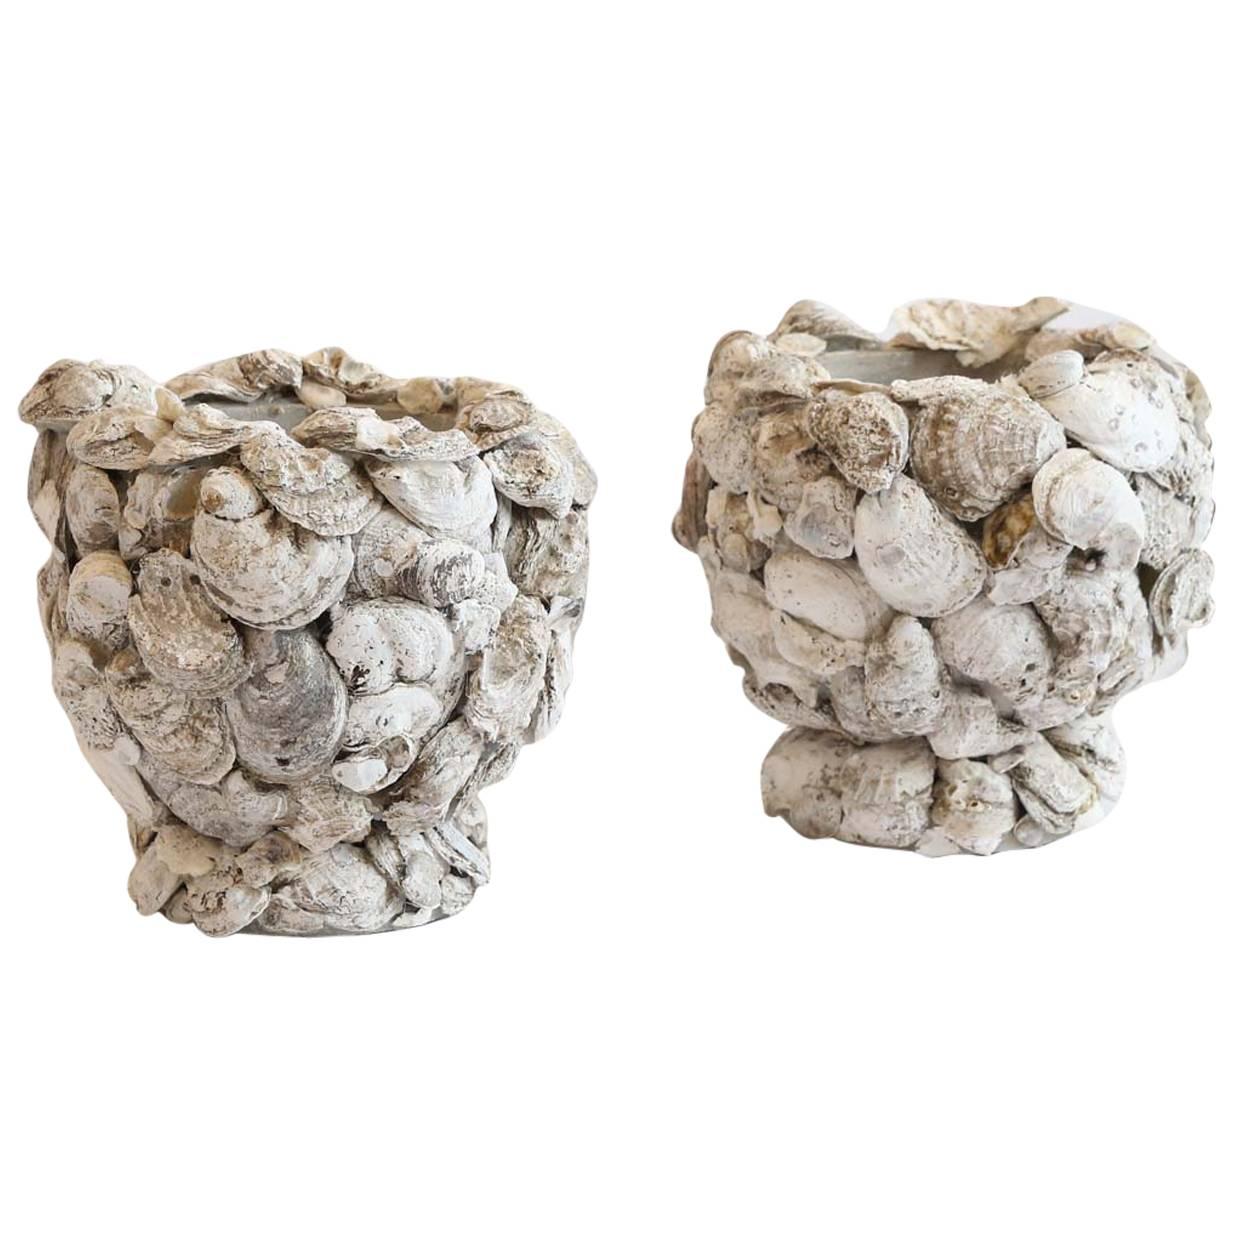 Pair of Oyster Shell Covered Cachepots